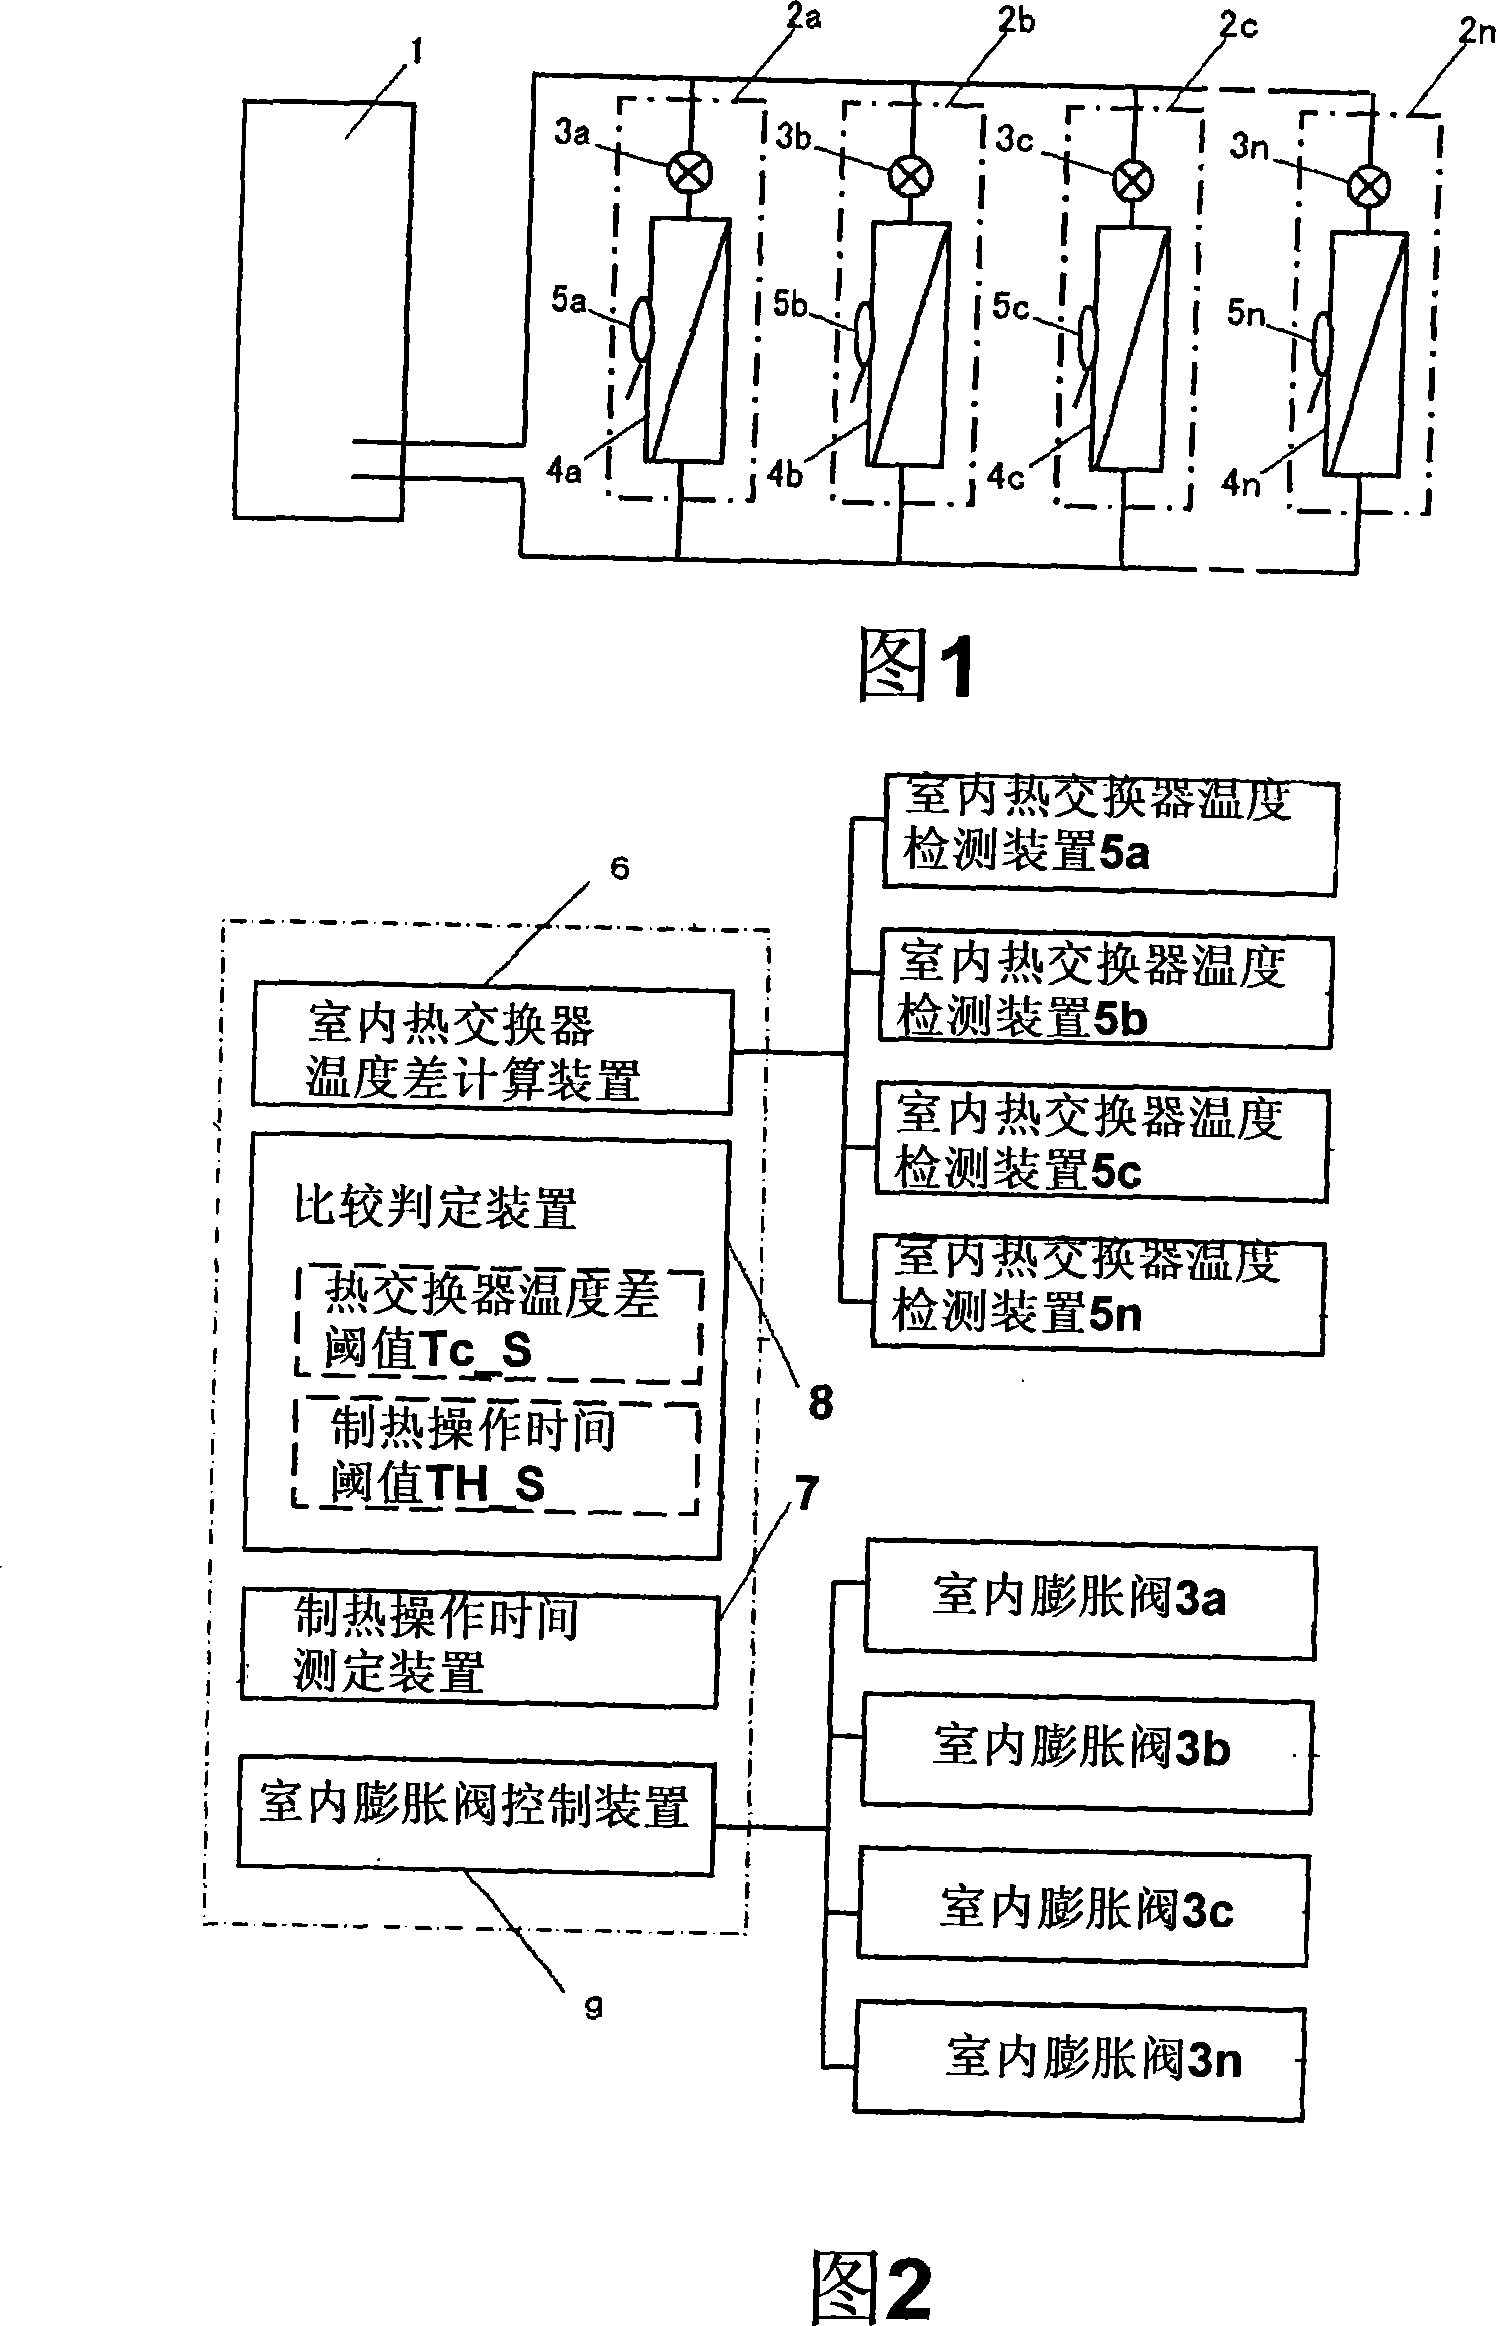 Multi-room type air-conditioning device